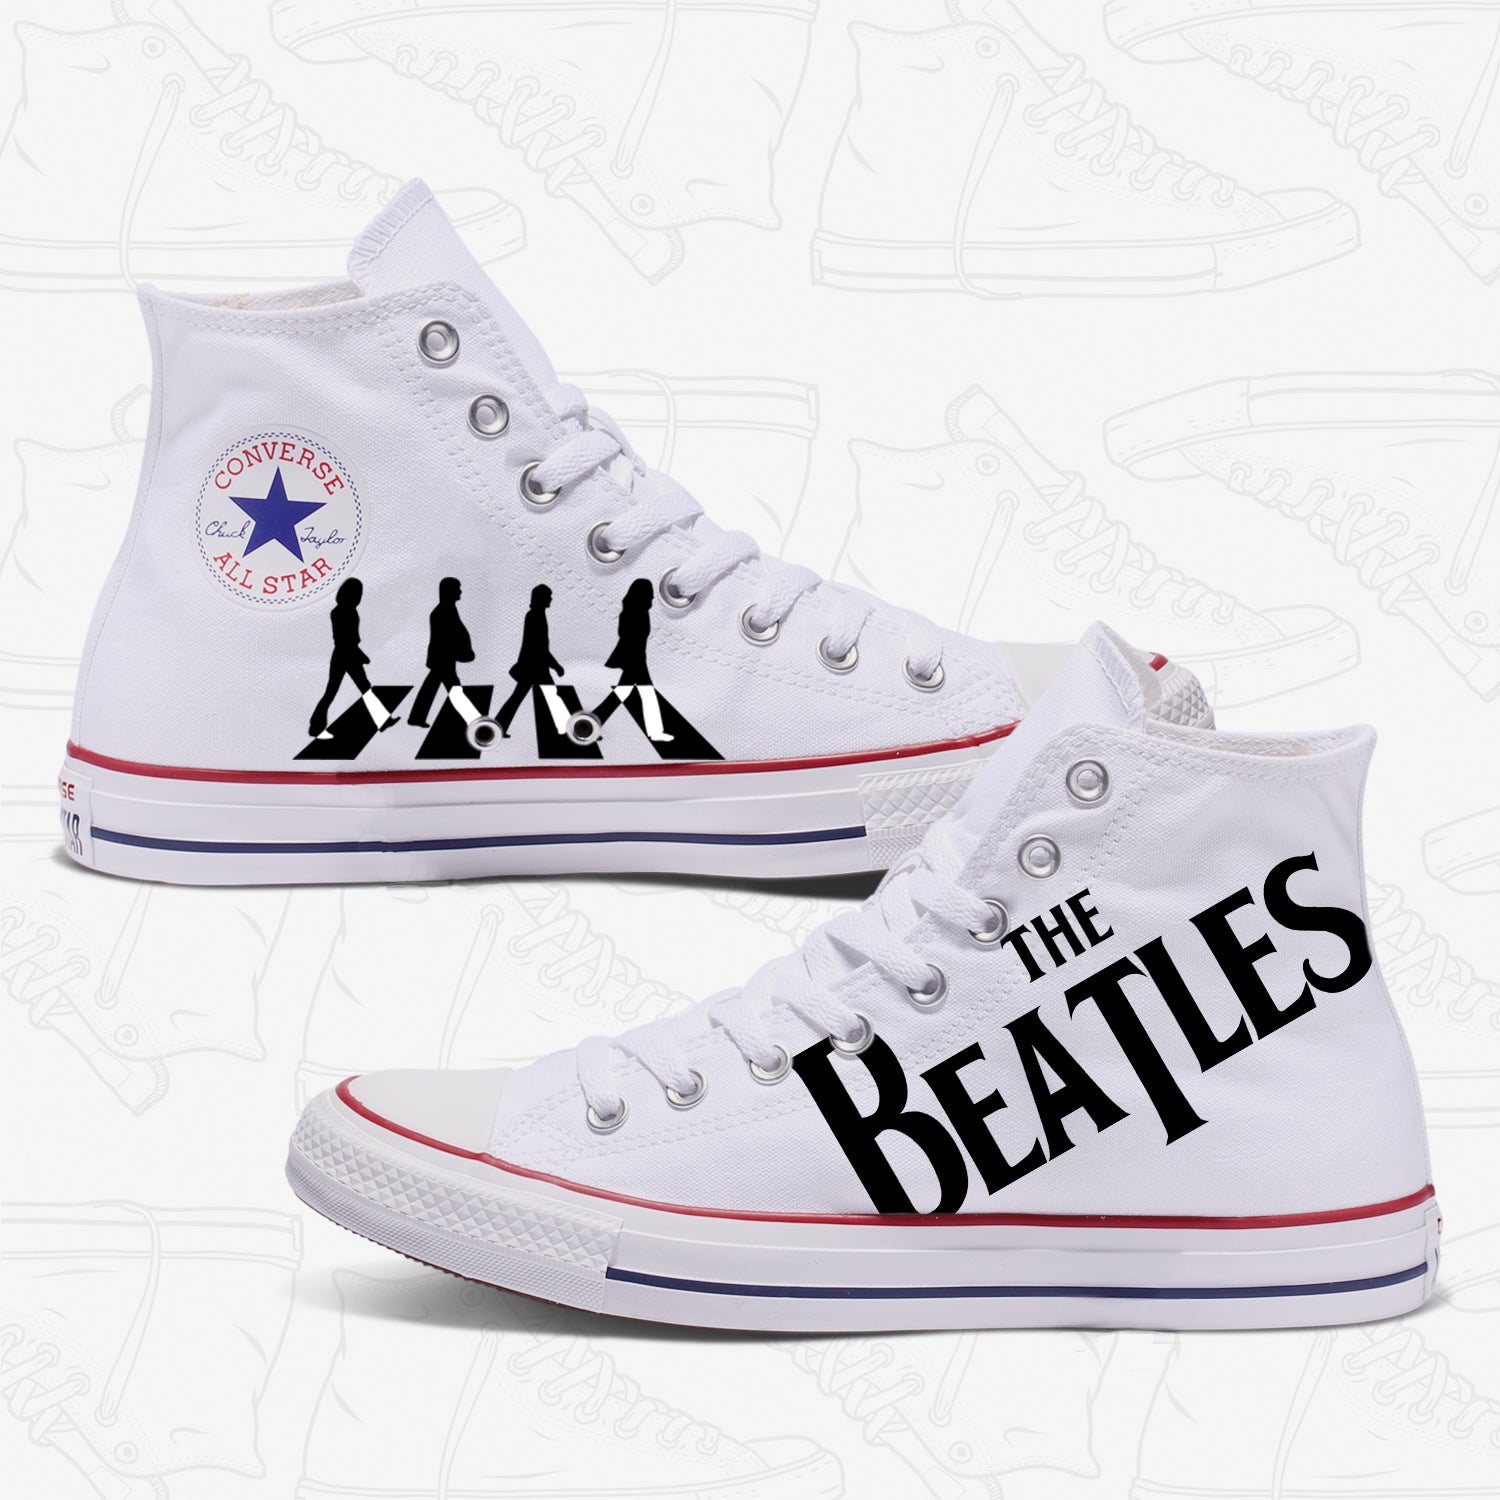 the beatles shoes converse